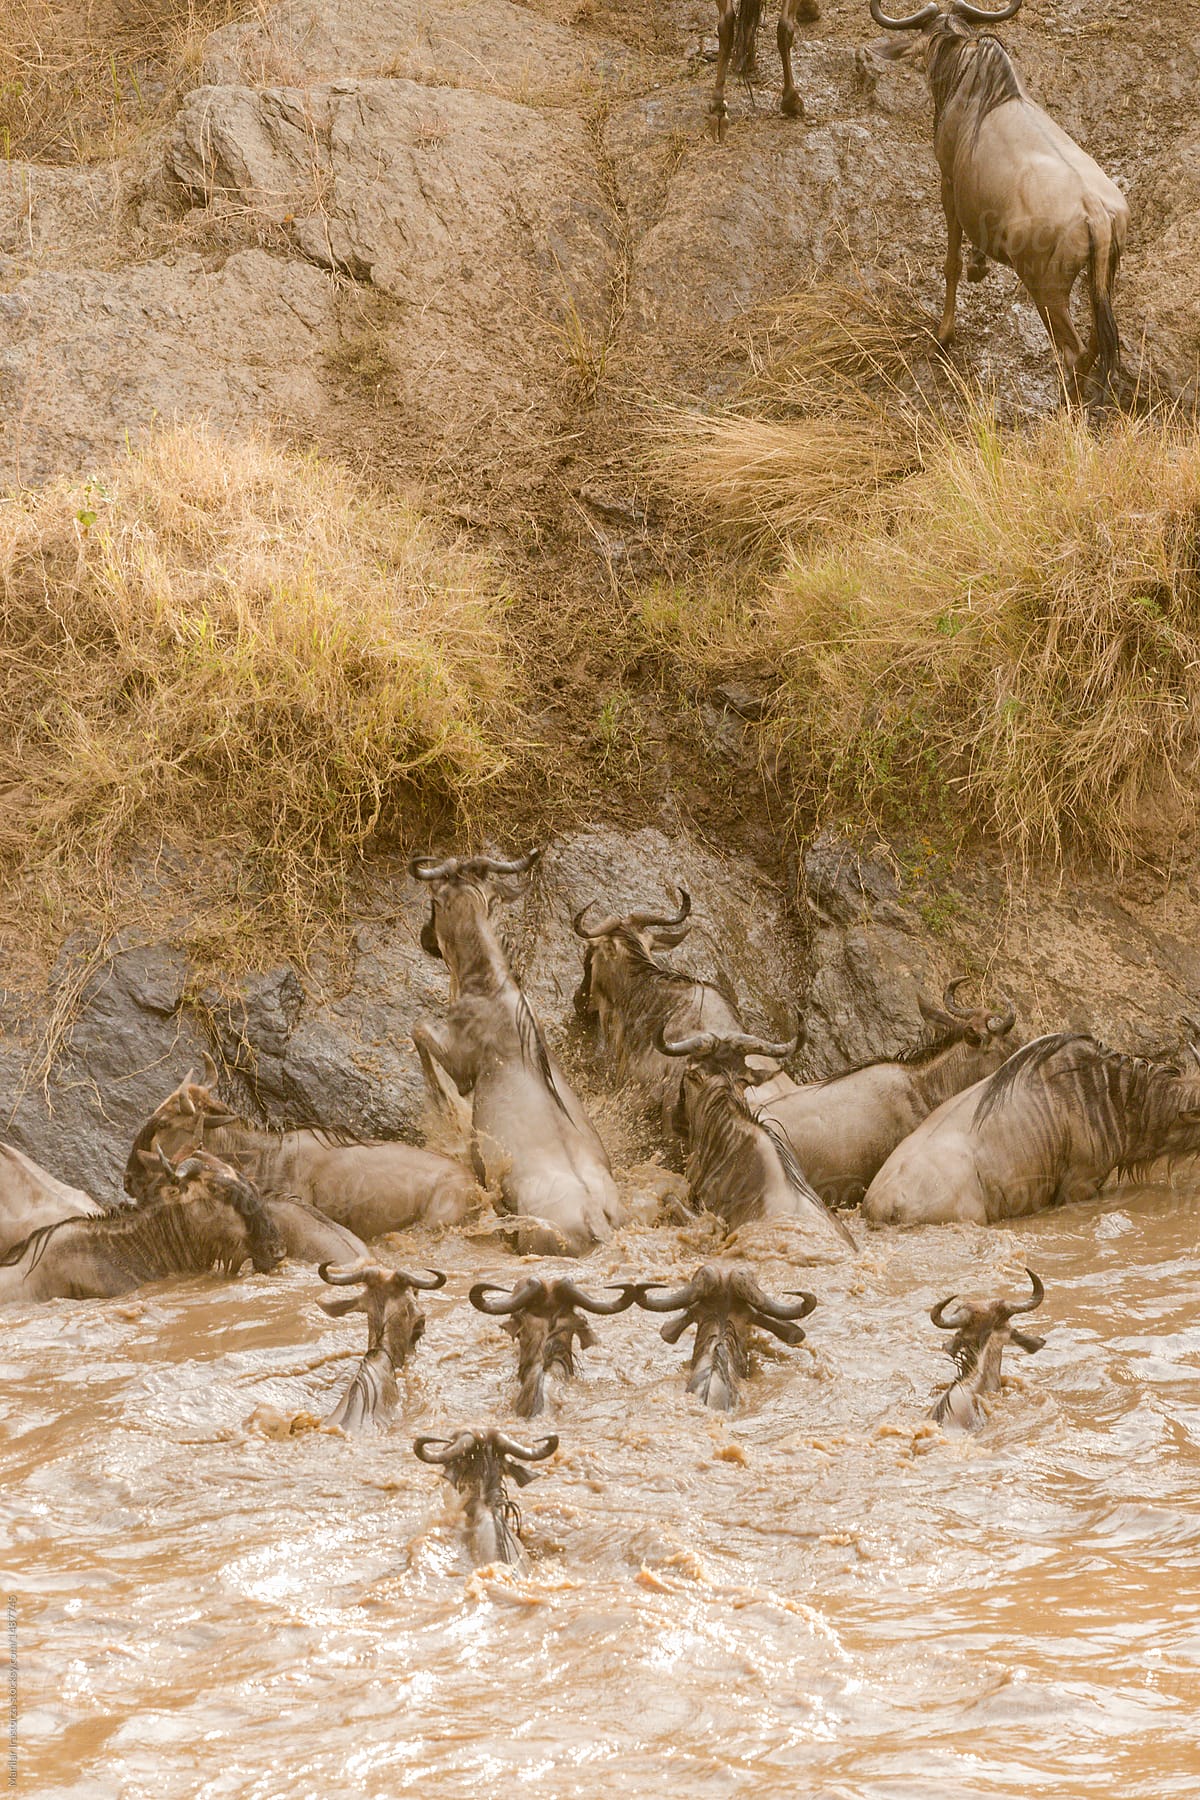 Wildebeest crossing the Mara River in the Great Migration